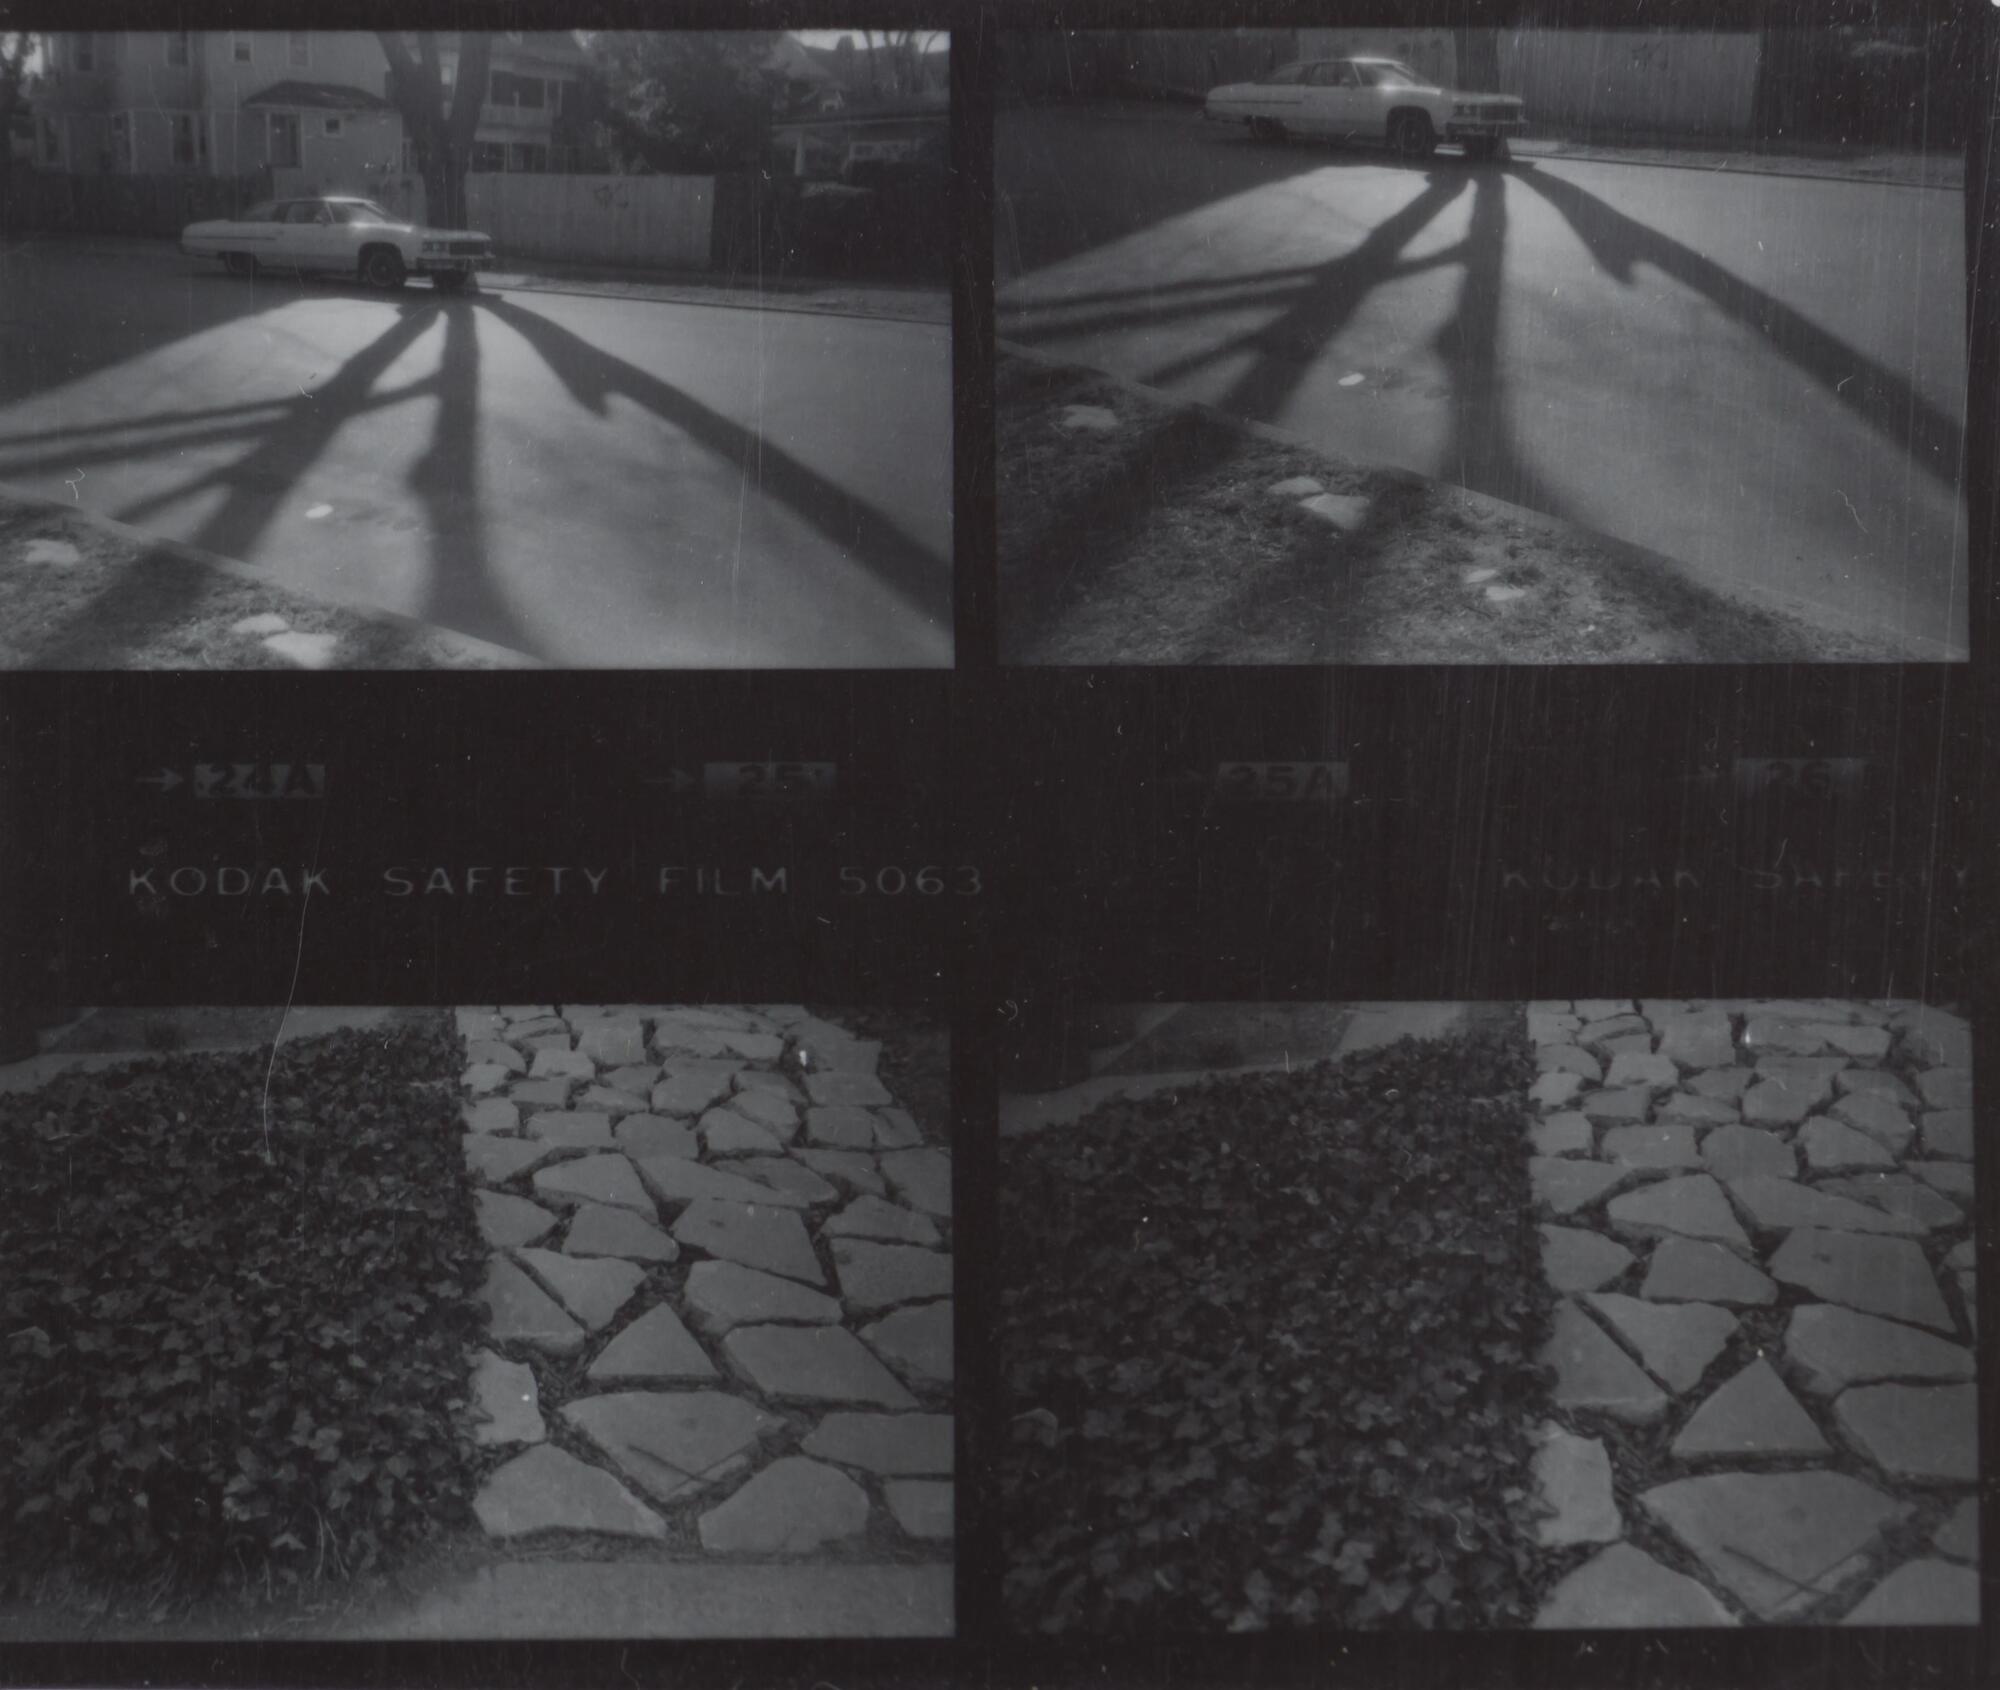 Four images - two of a car parked in the street with a shadow of a tree and two of a stone walkway.